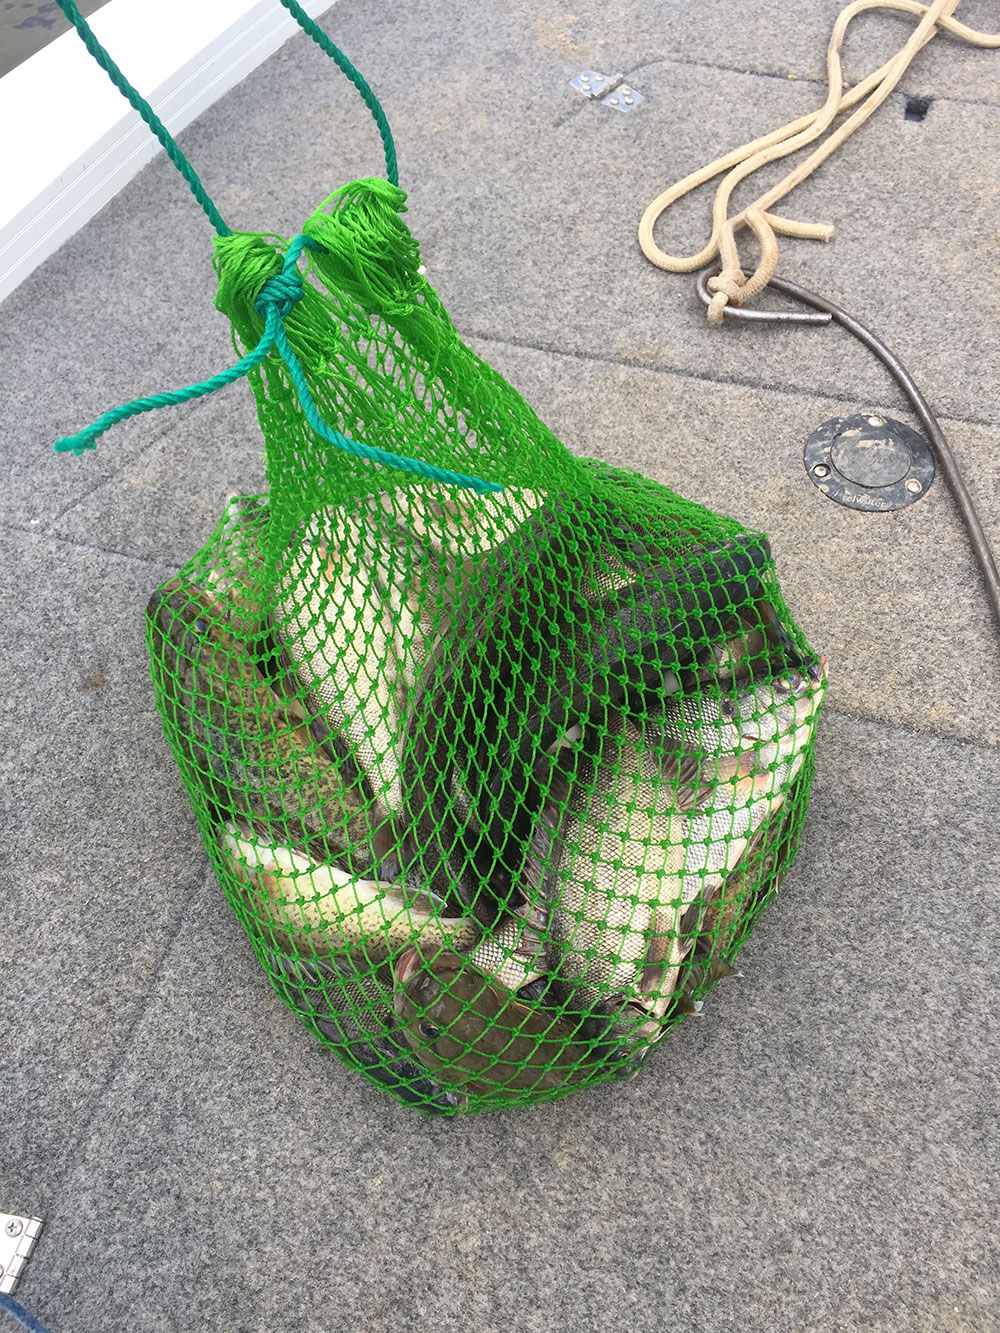 A bag containing illegally caught fish located on the deck of a boat